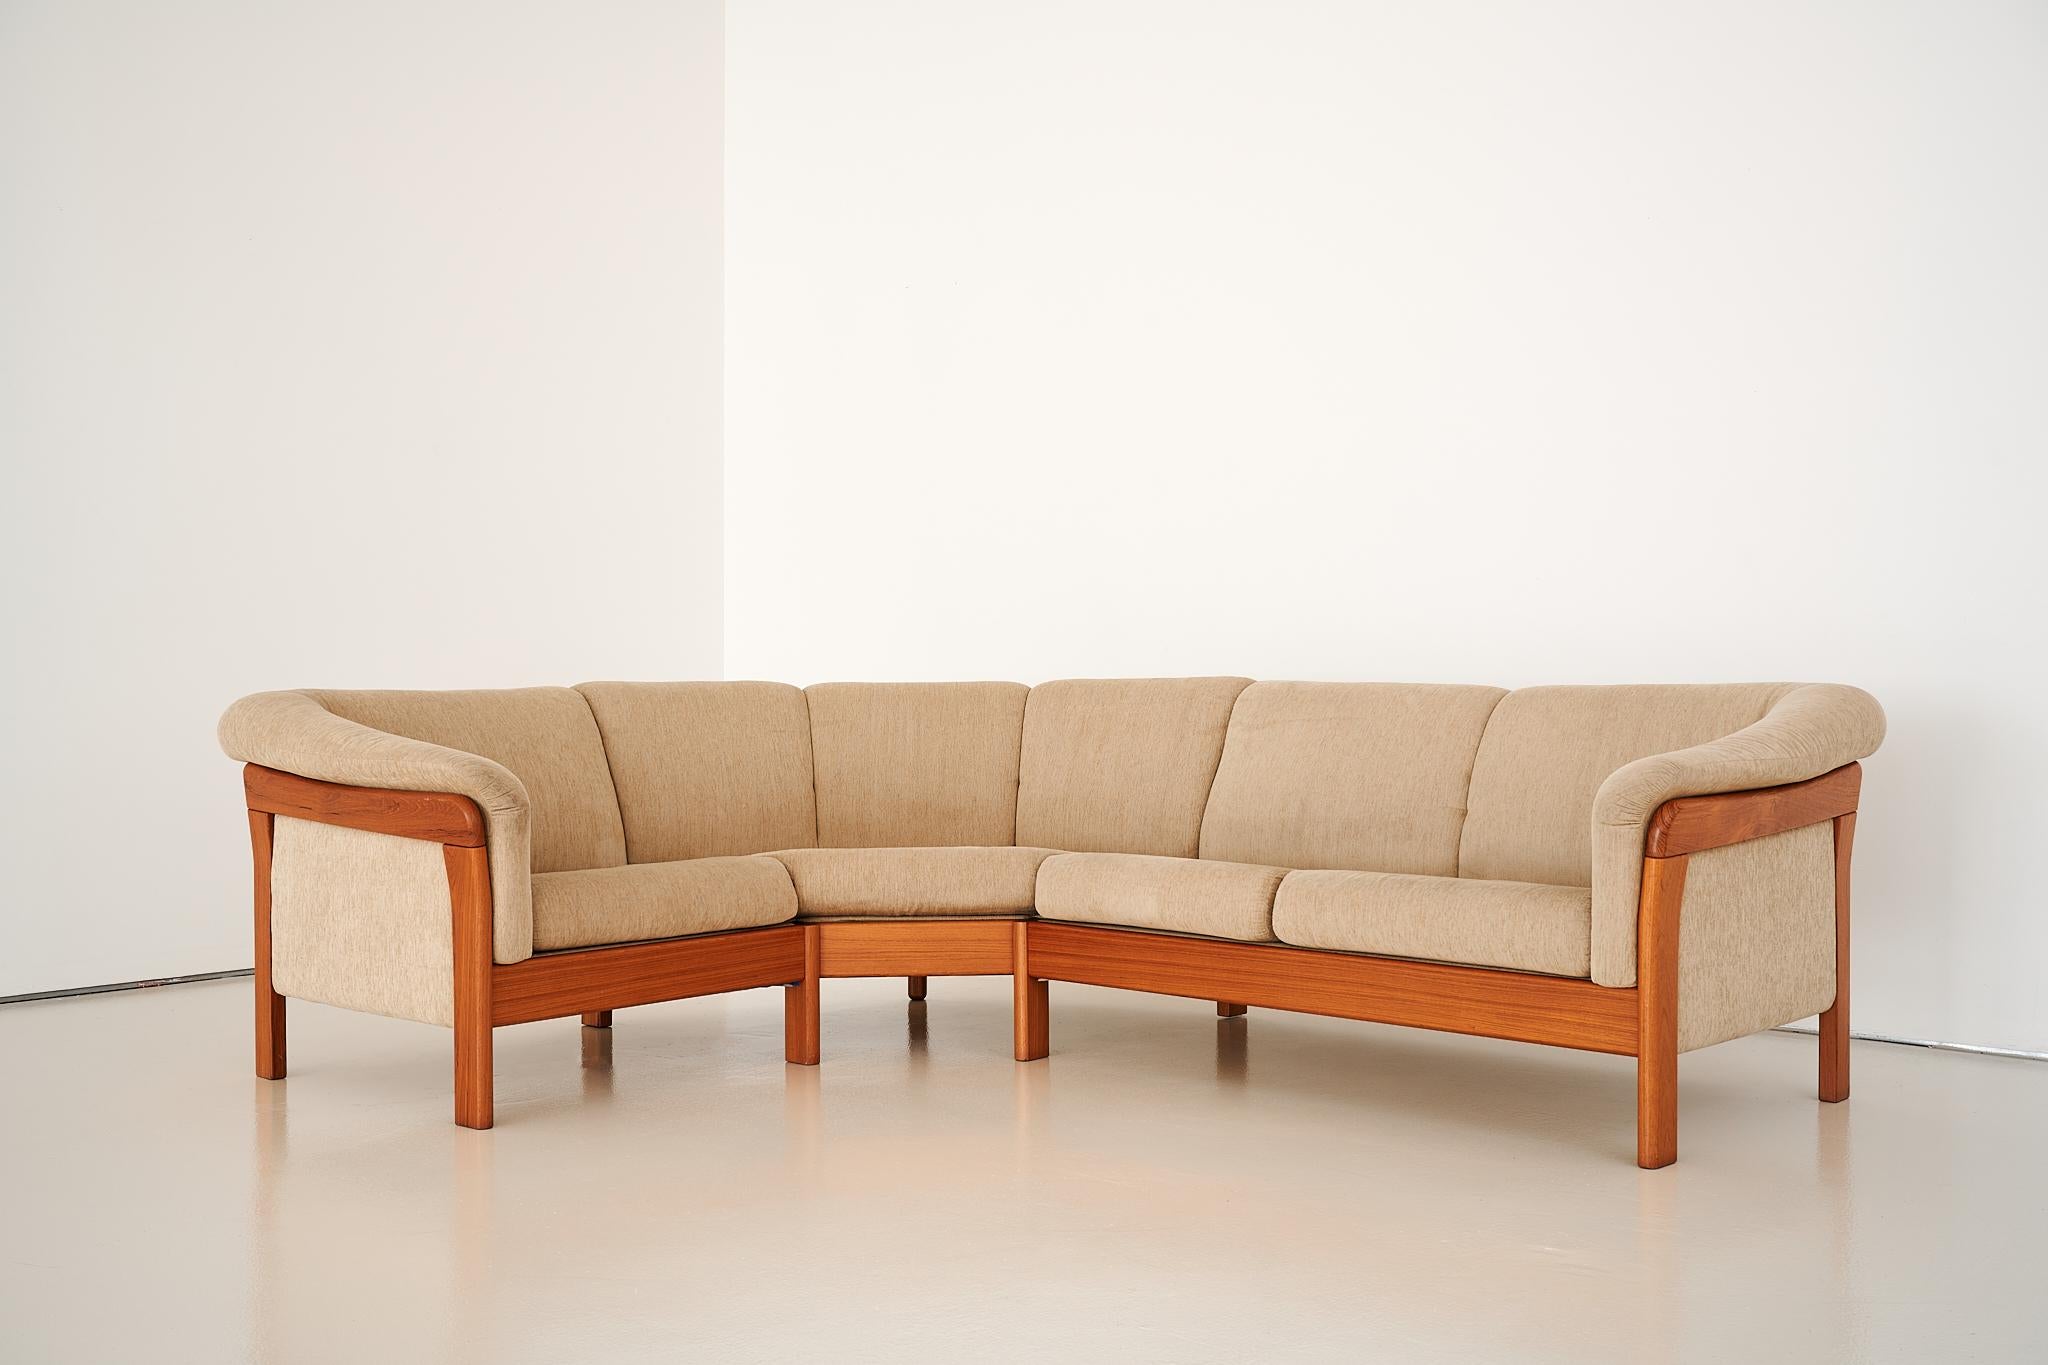 1990’s Danish Mid-Century style

Manufactured in Canada by KSL Ontario

Three-piece sectional 

Exposed Teak frame

Sloped roll arm

Tight back, loose seat cushions

Original cream chenille upholstery

Some hardware replaced

Sourced in